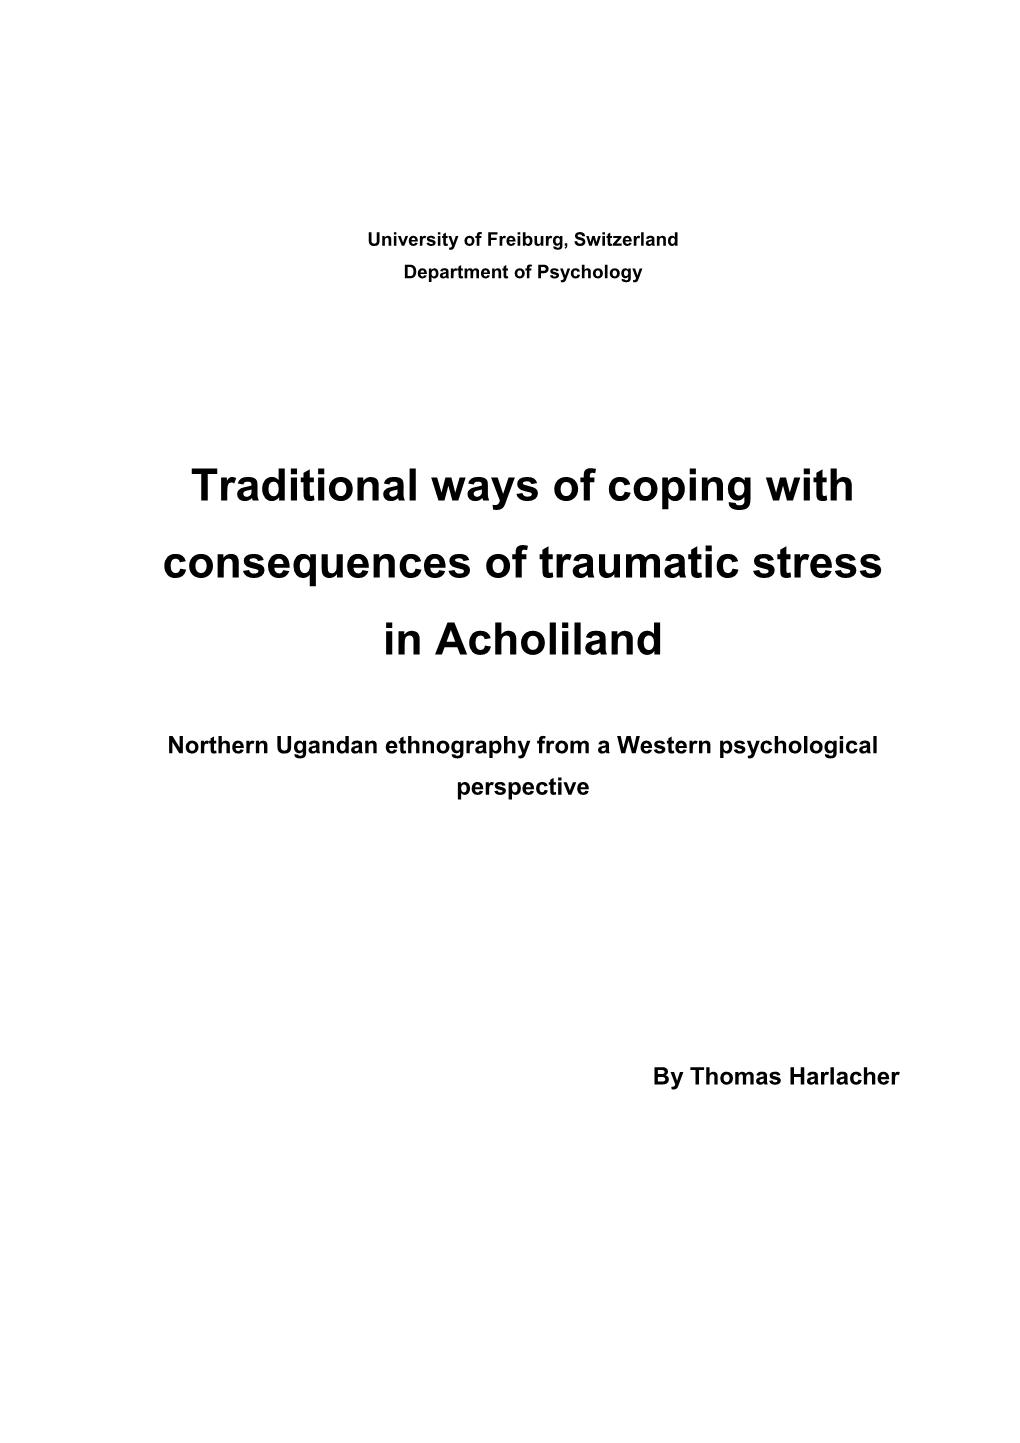 Traditional Ways of Coping with Consequences of Traumatic Stress in Acholiland